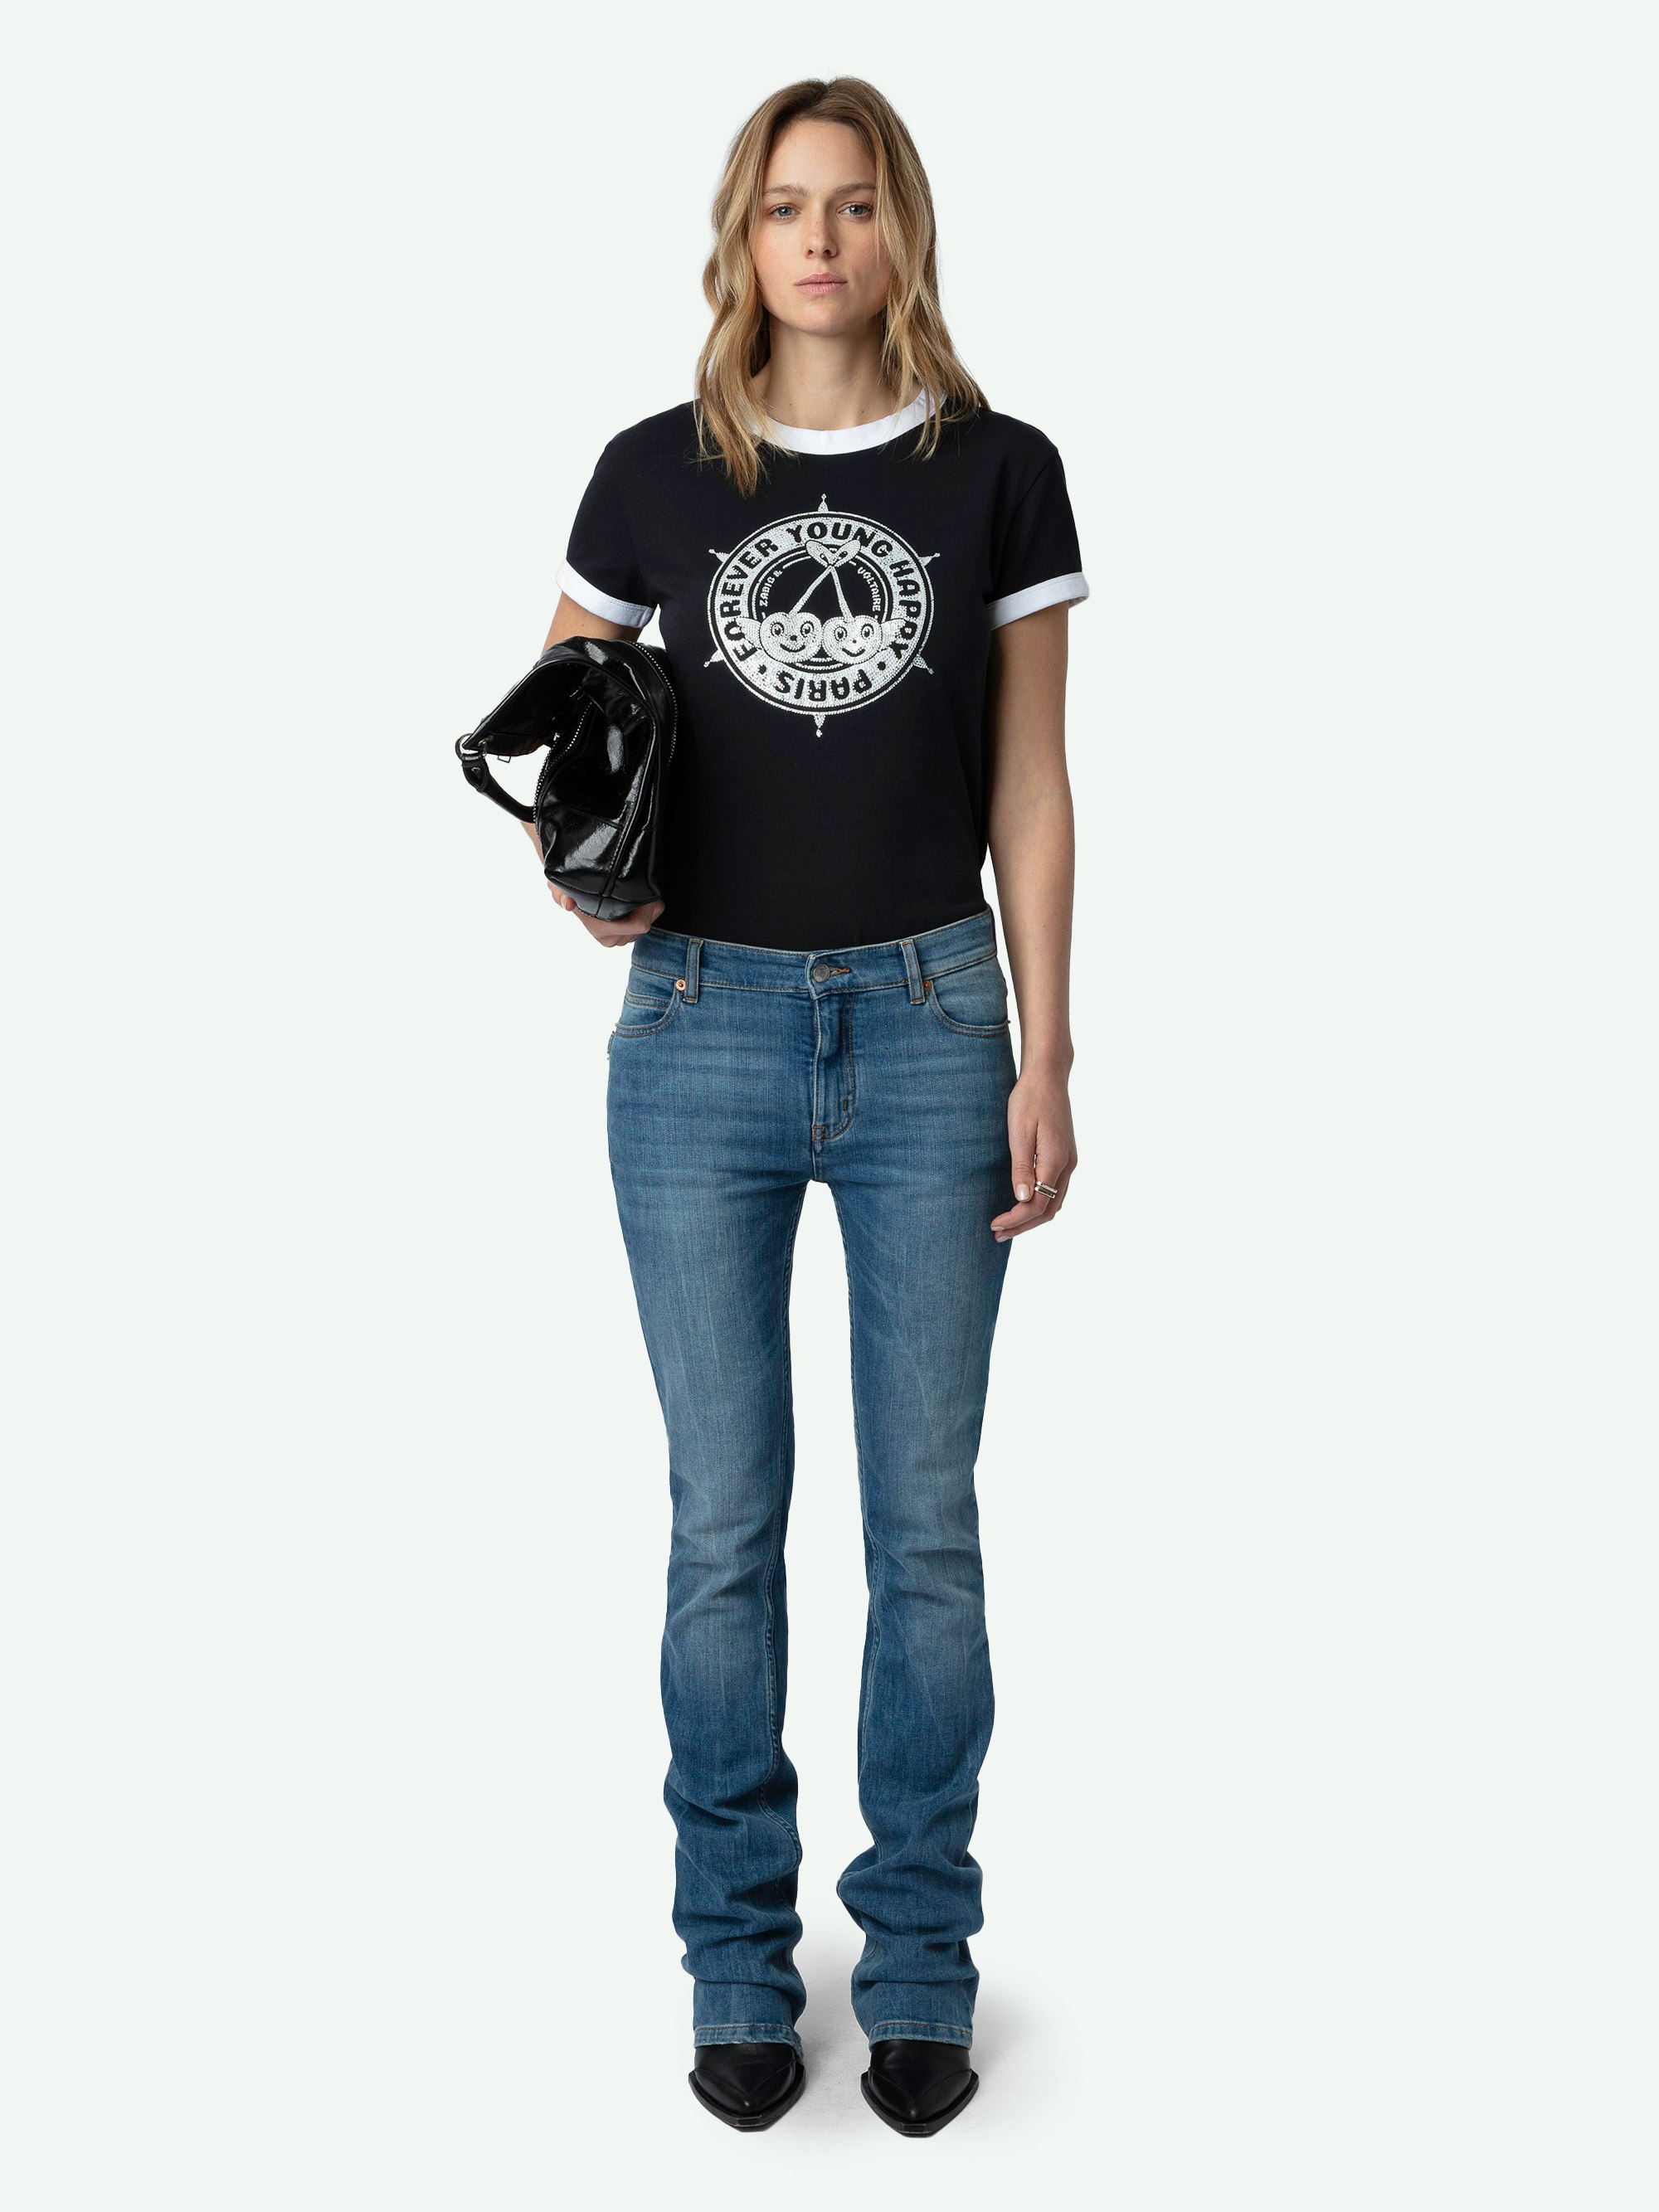 Walk Diamante Insignia T-shirt - Short-sleeved black organic cotton T-shirt with insignia and cherry prints embellished with diamante on the front.